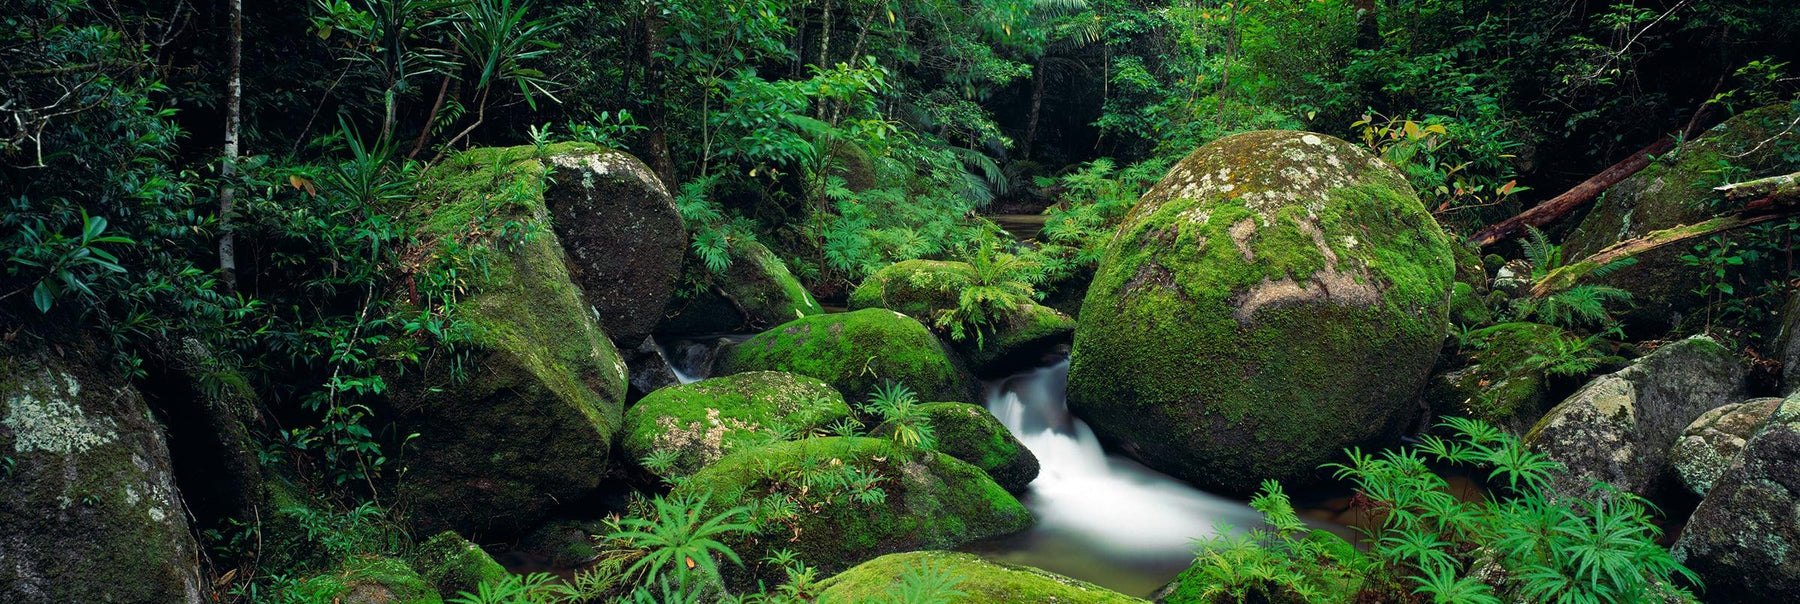 Giant moss covered boulders along a stream in the tropical rainforest of Mount Lewis, Australia